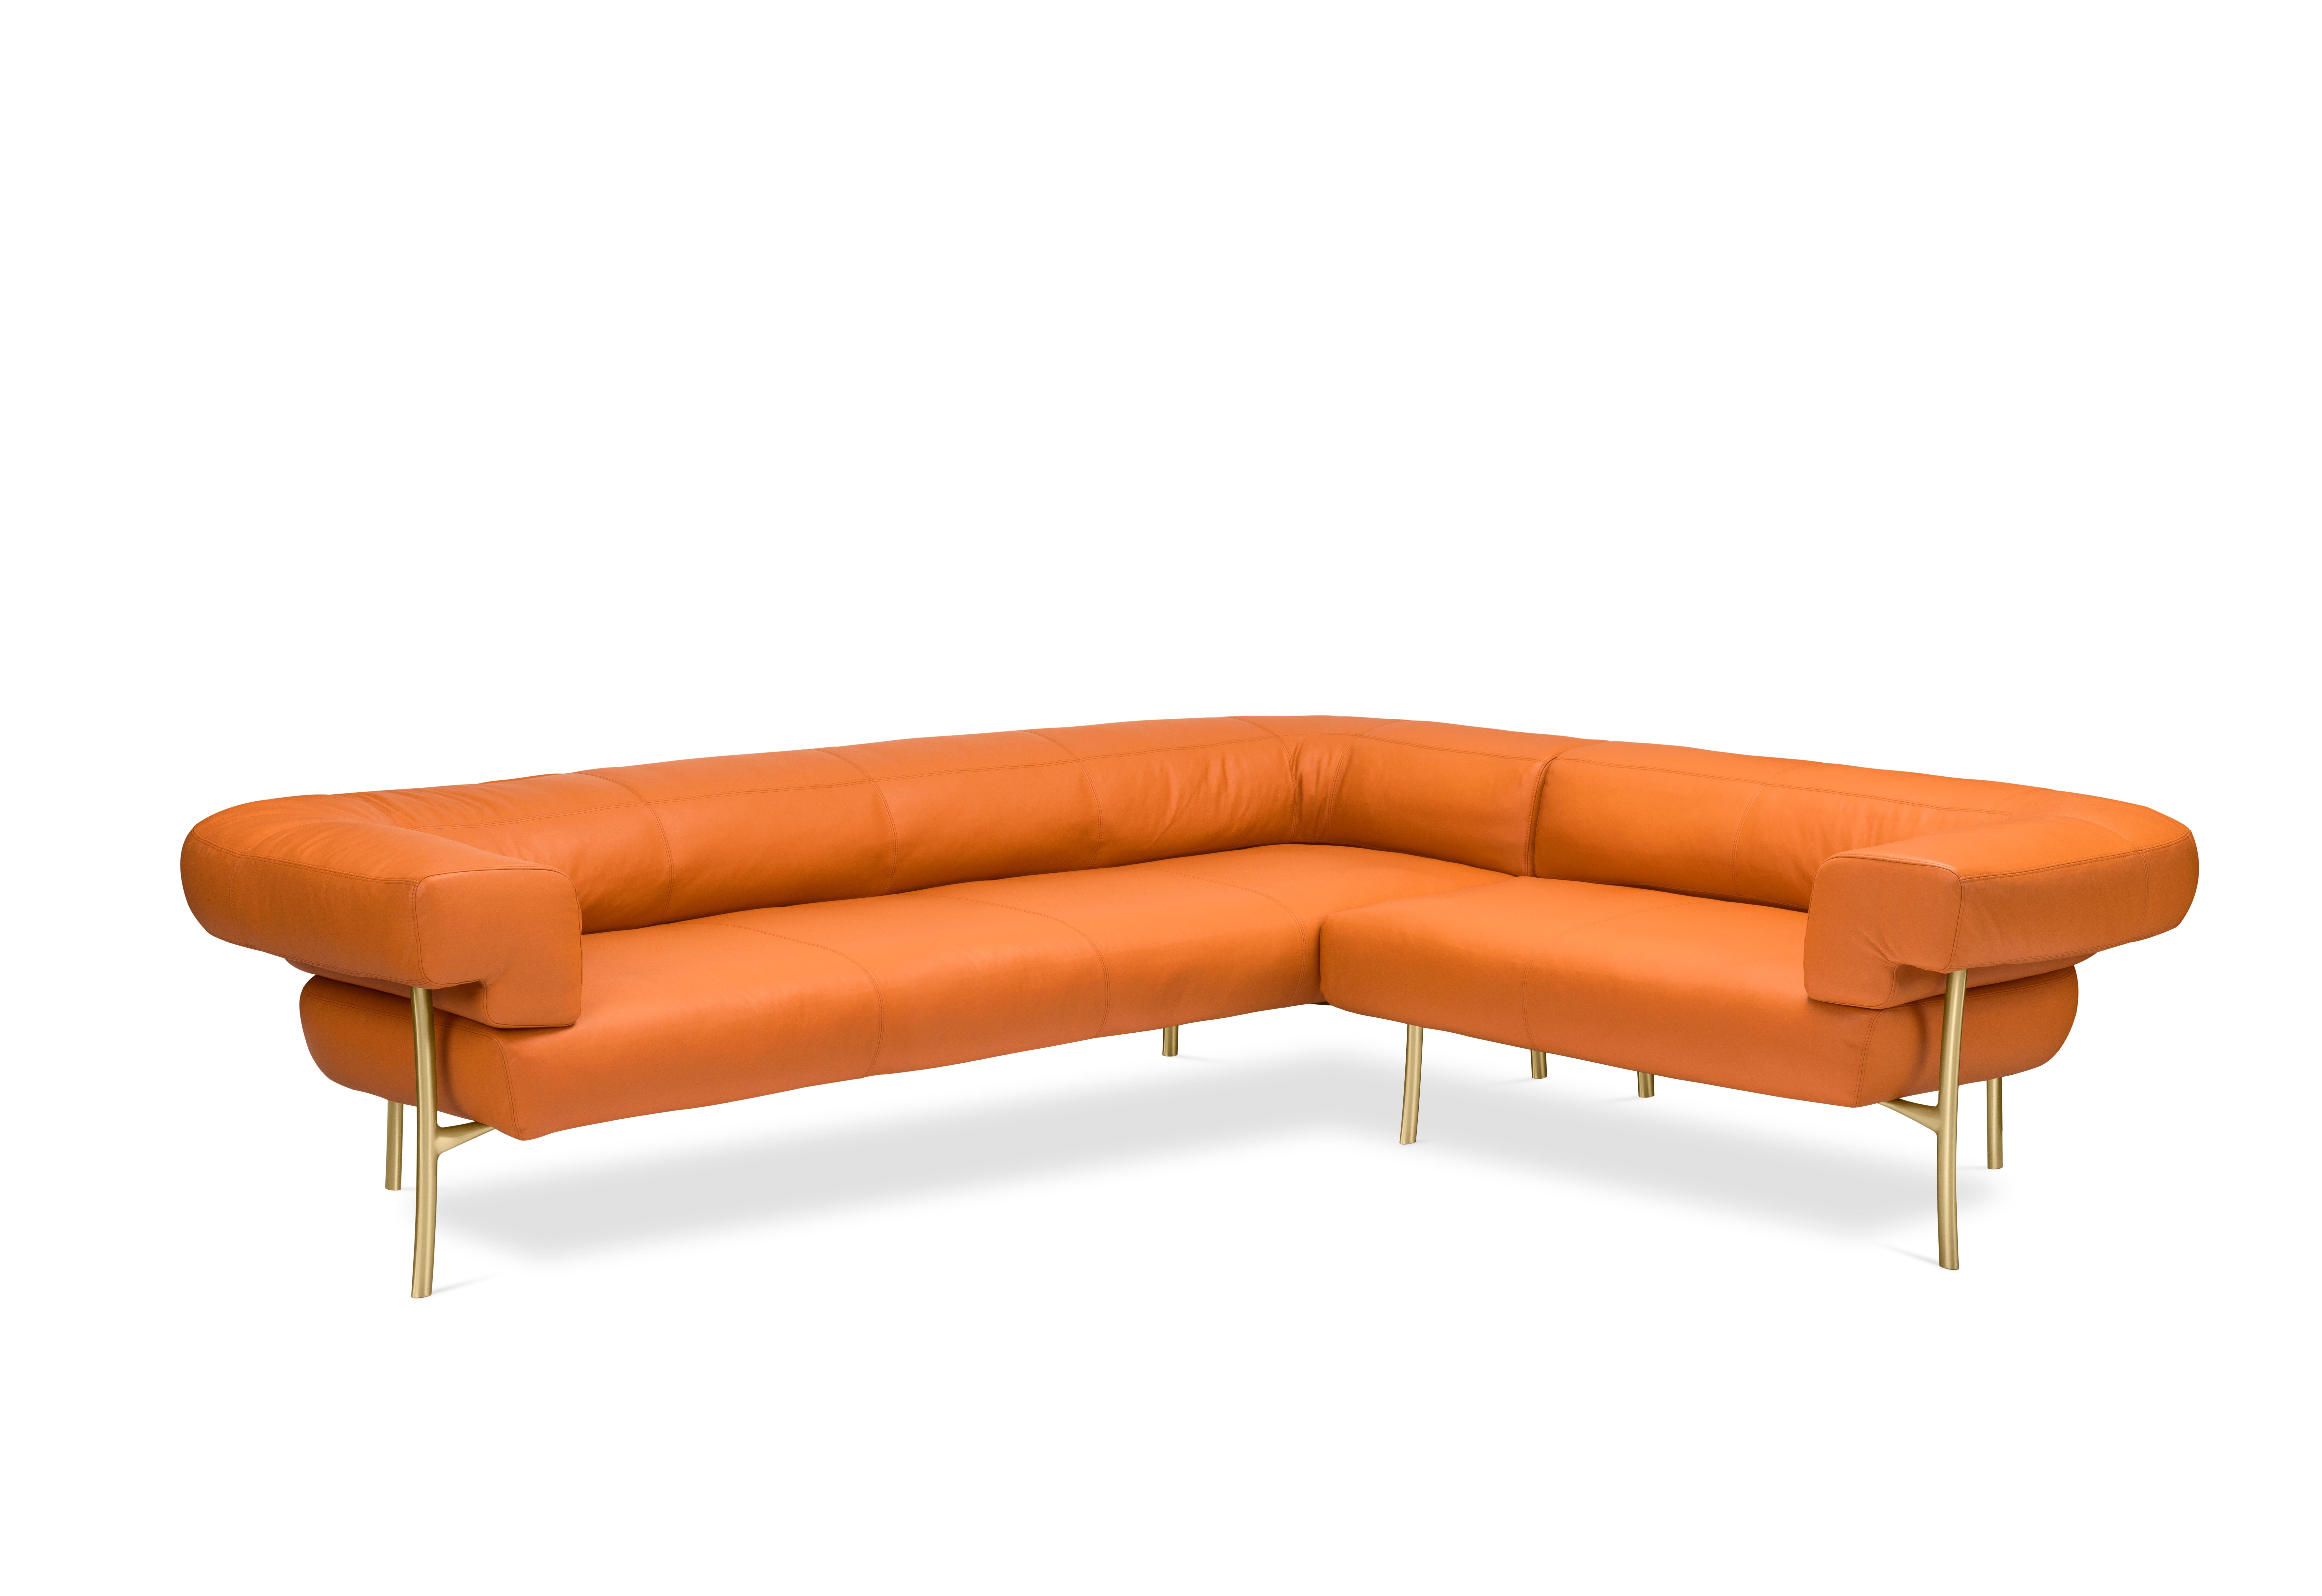 Katana 4 Seater Sofa in Arancio Natural Leather with Satin Brass Legs In Excellent Condition For Sale In Brooklyn, NY